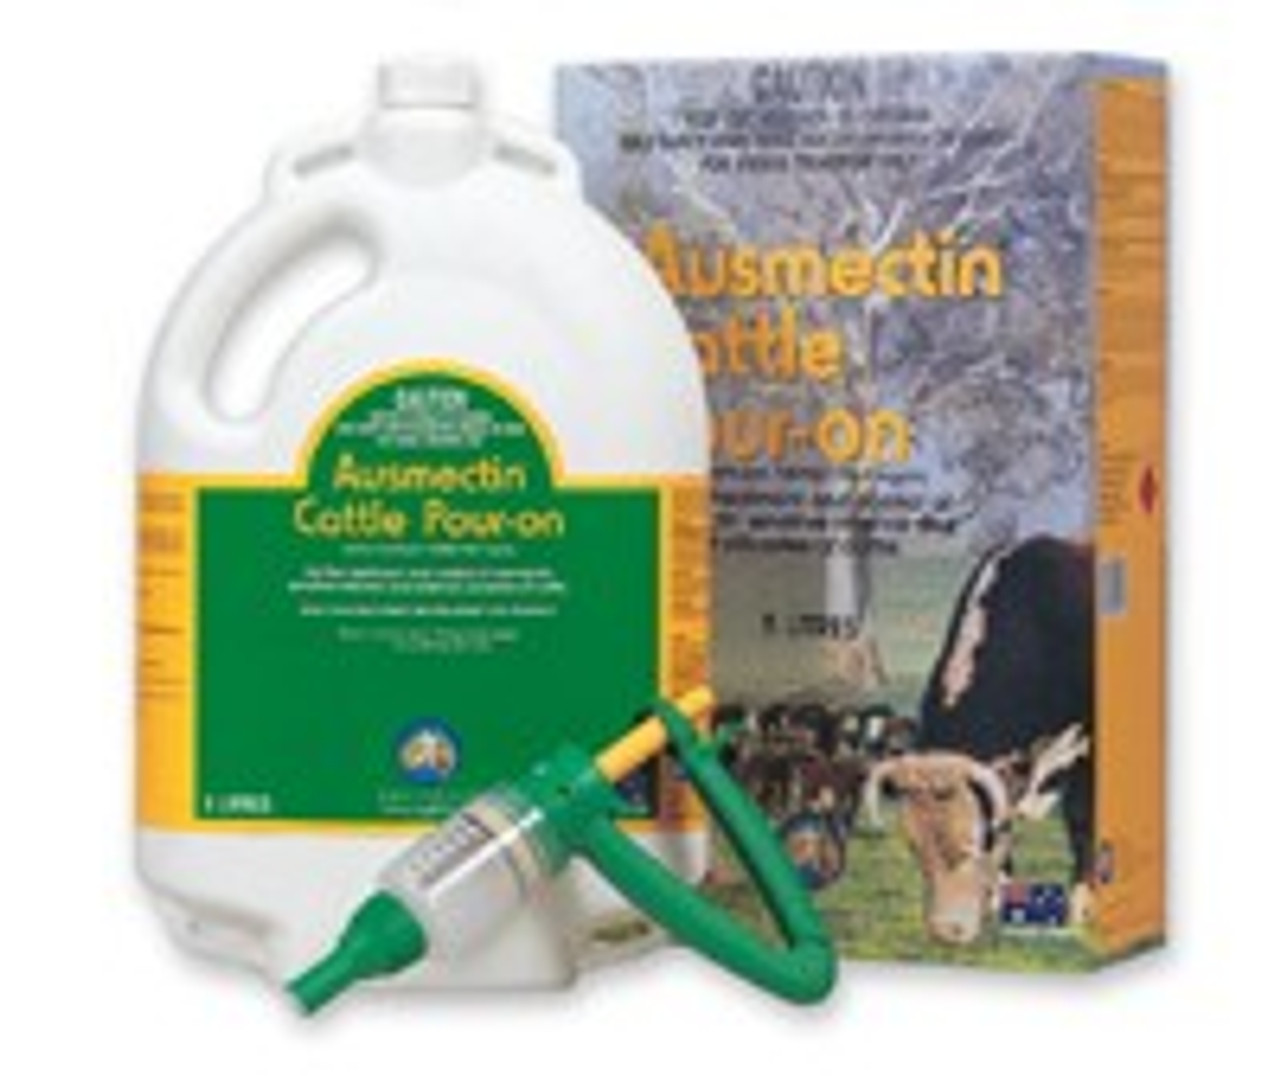 Ausmectin Pour On For Cattle 20 L